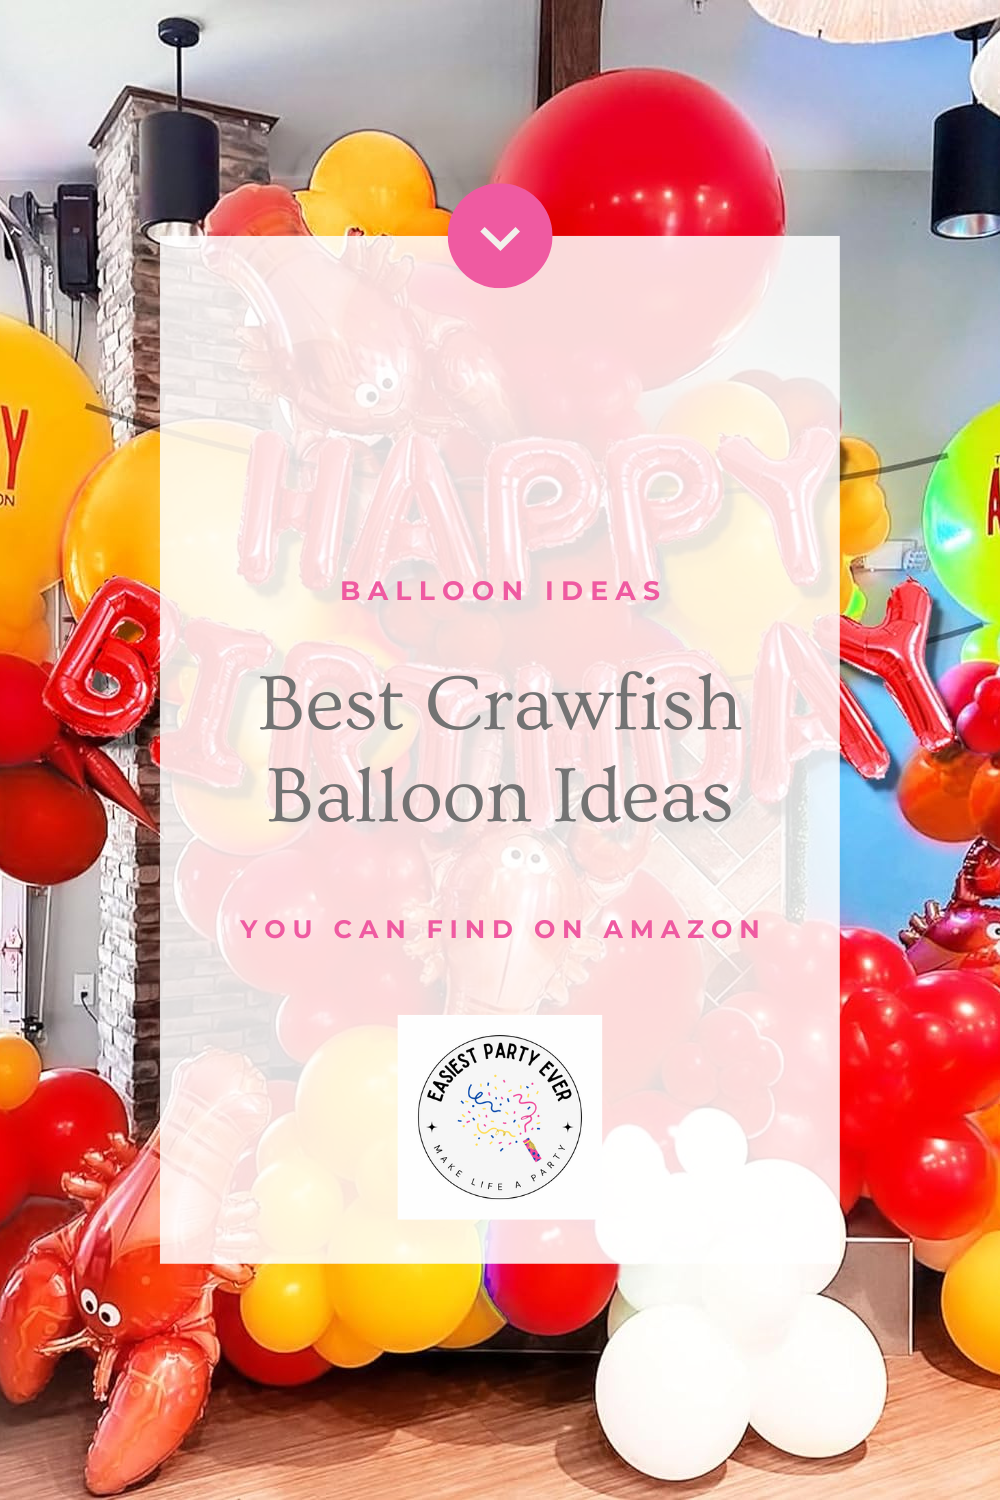 The Best 8 Crawfish Balloon Garlands & Bouquets on Amazon